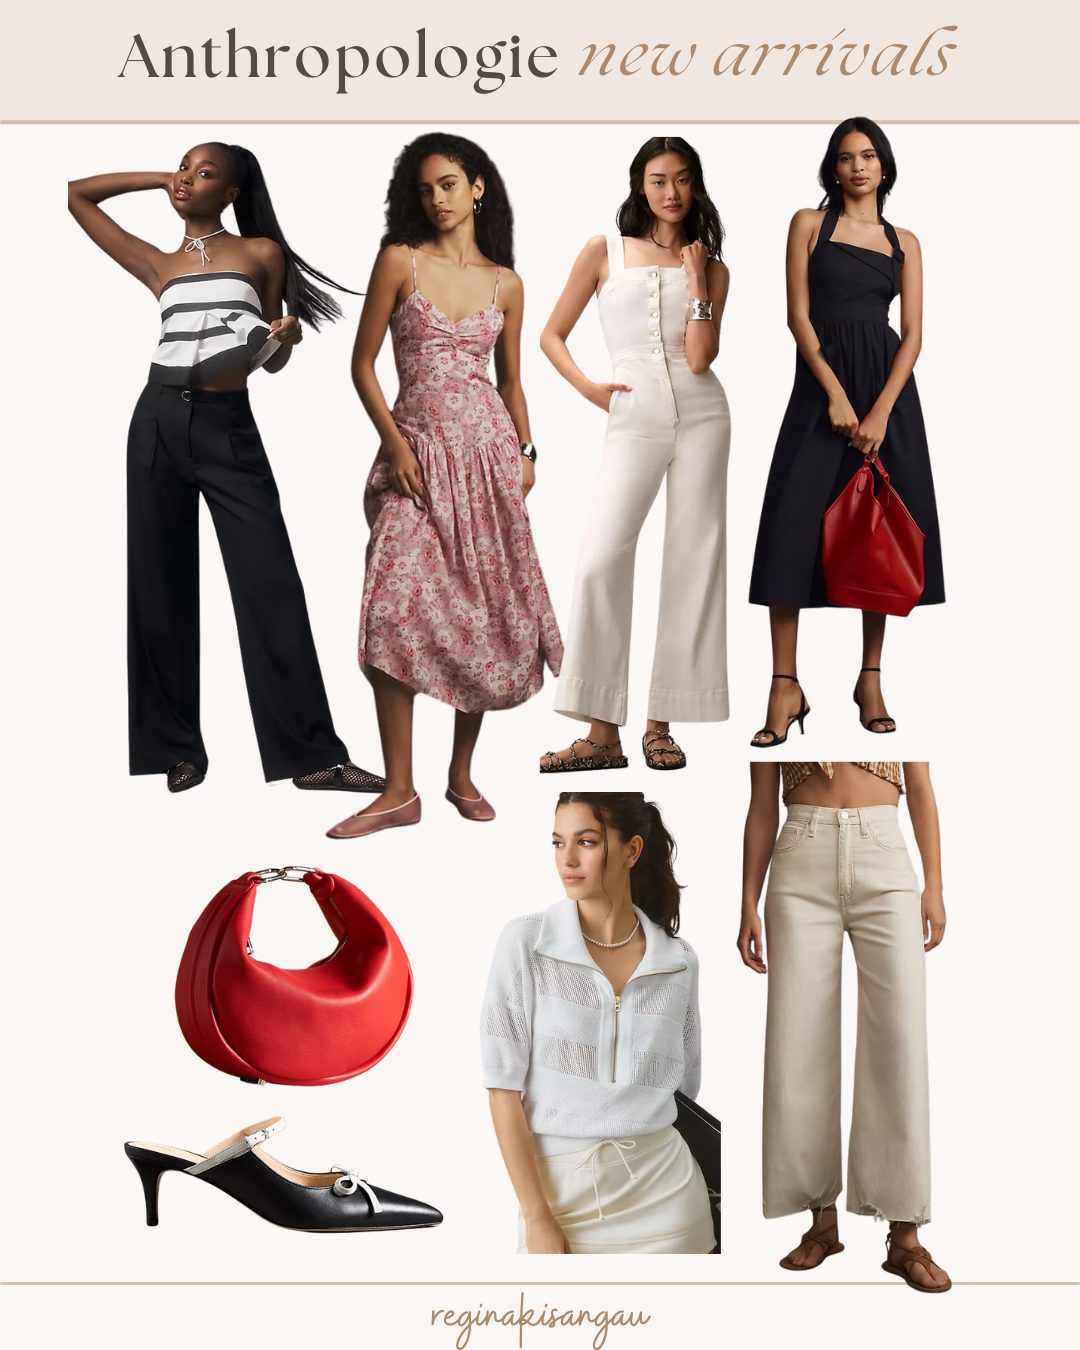 Check Out the New Arrivals at Anthropologie Fashion